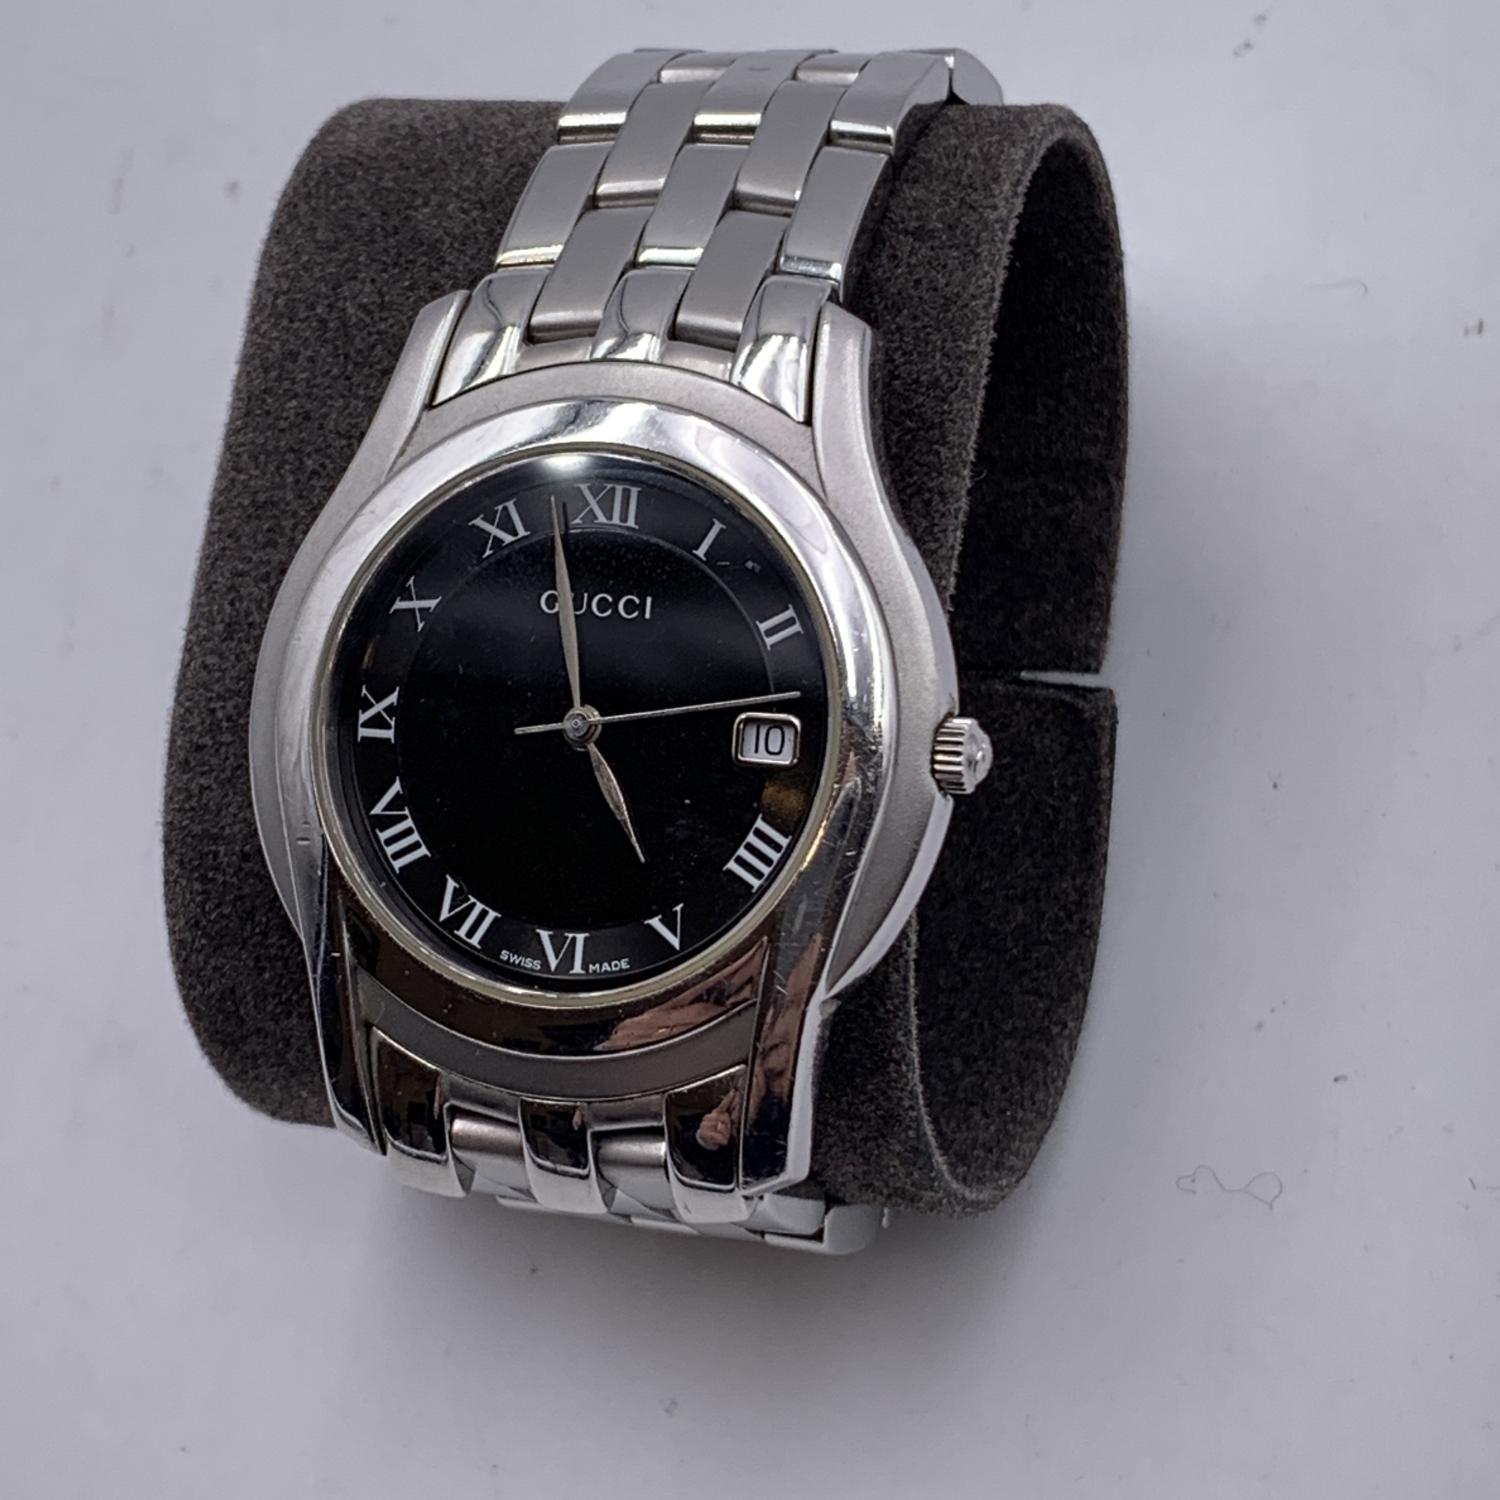 Women's Gucci Stainless Steel Mod 5500 M Watch Date Indicator Black